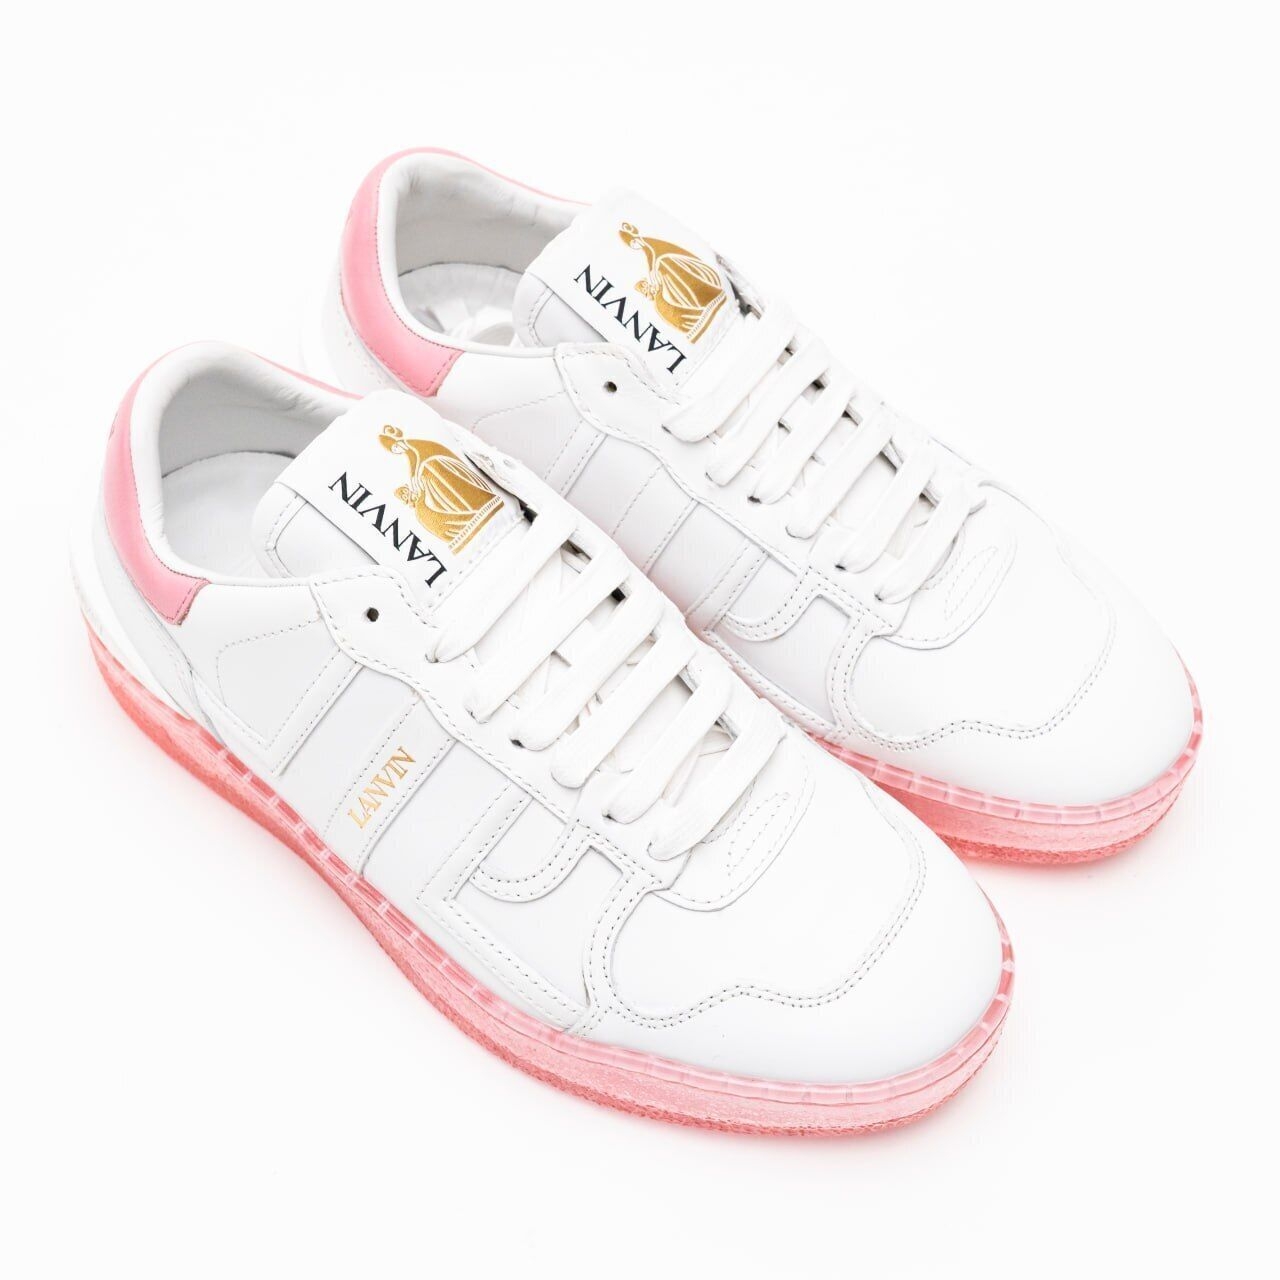 Lanvin Tennis Leather Clay Tennis Sneakers White Pink Women